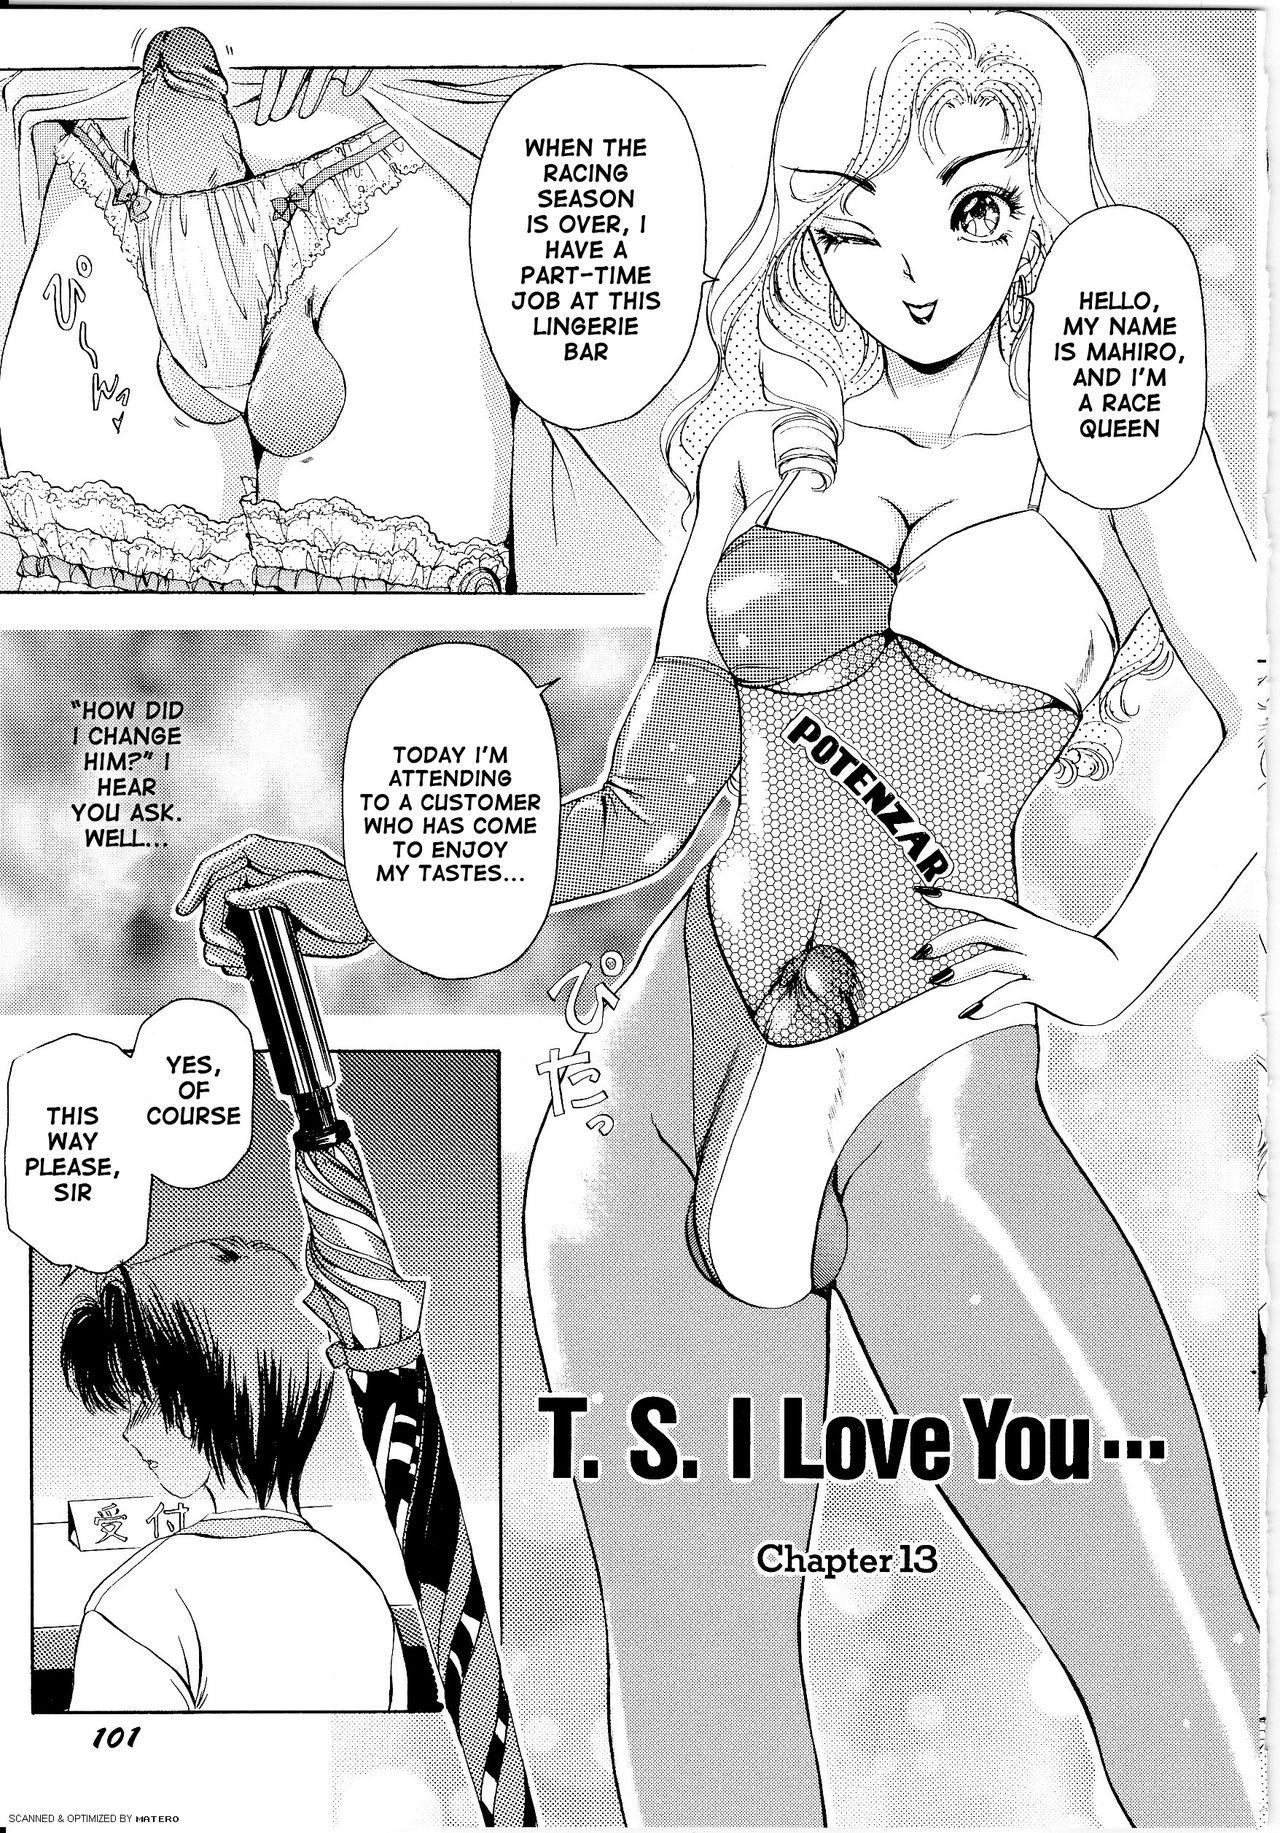 T.S. I LOVE YOU... 1 Chapter 13 0